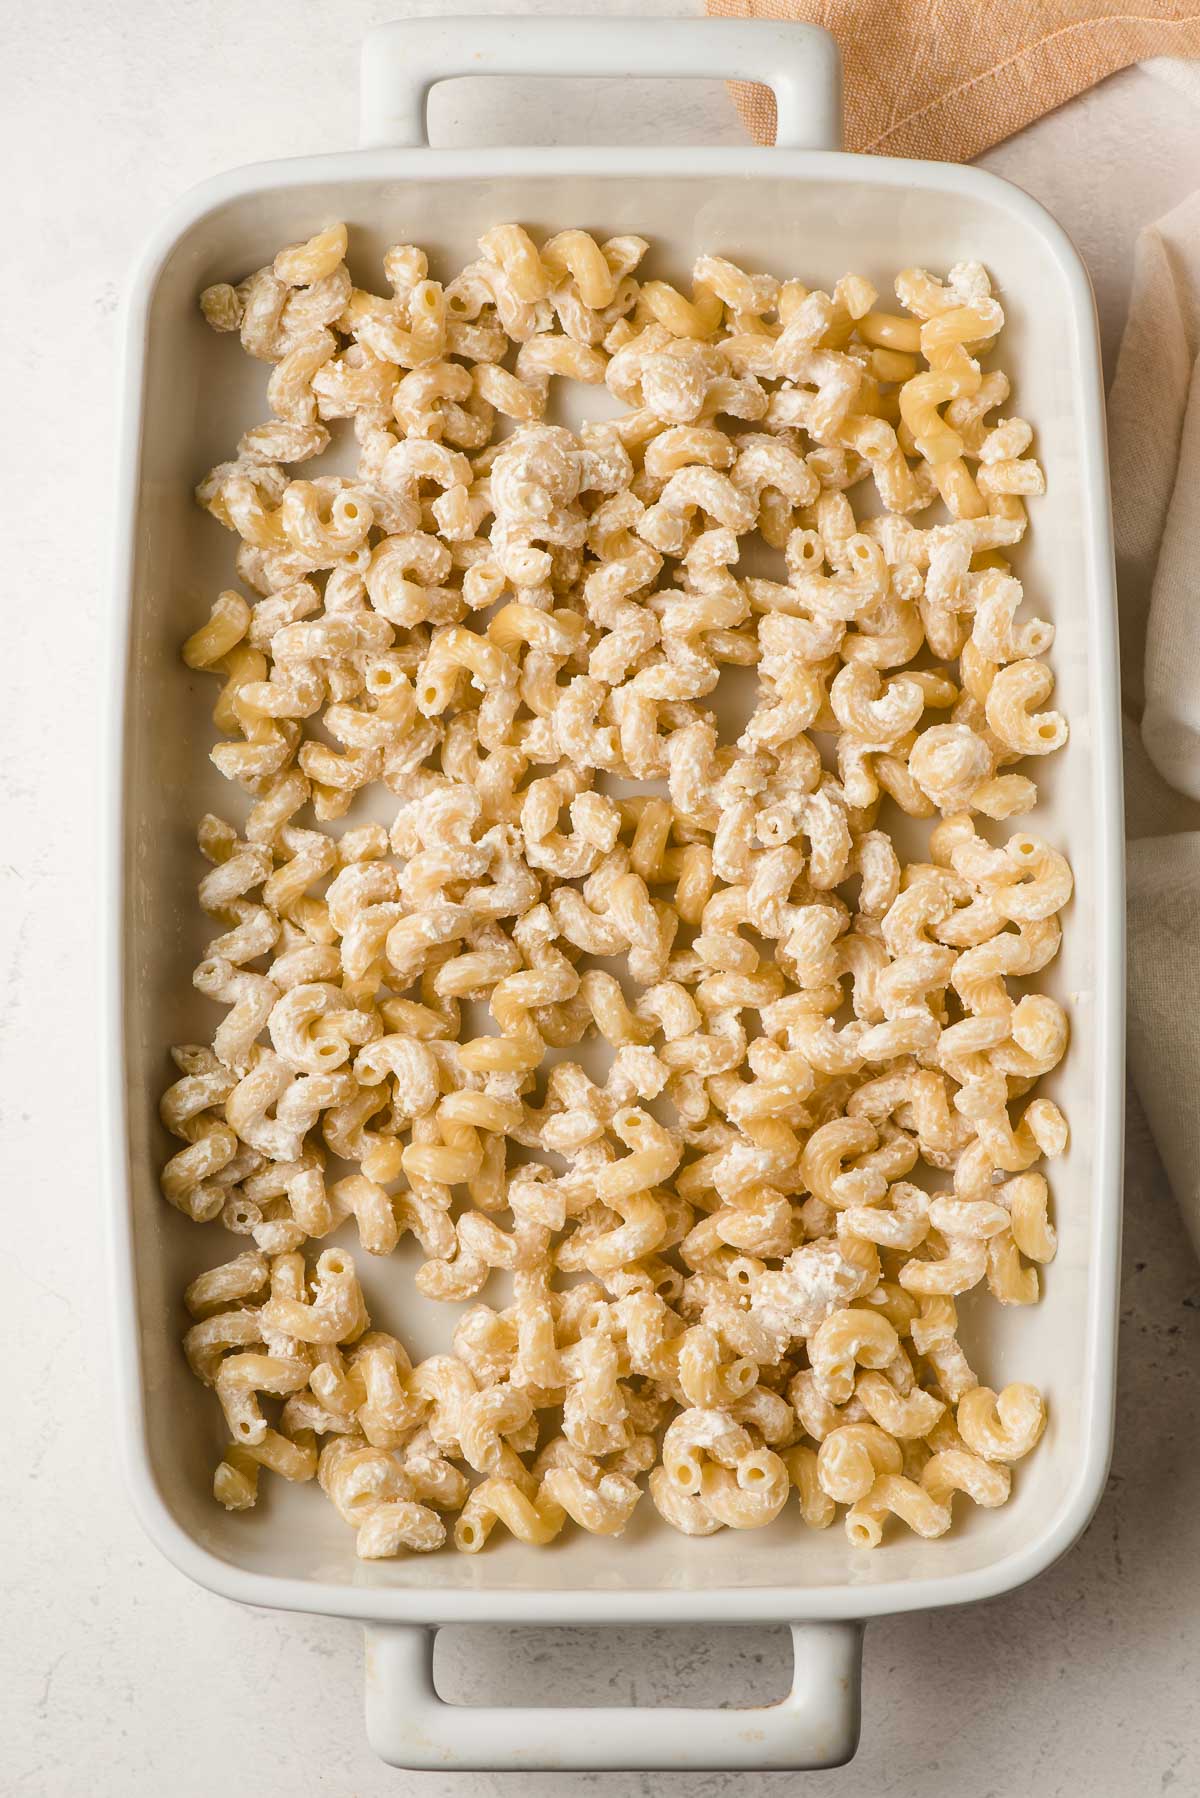 Cavatappi noodles tossed with sour cream in a casserole dish.